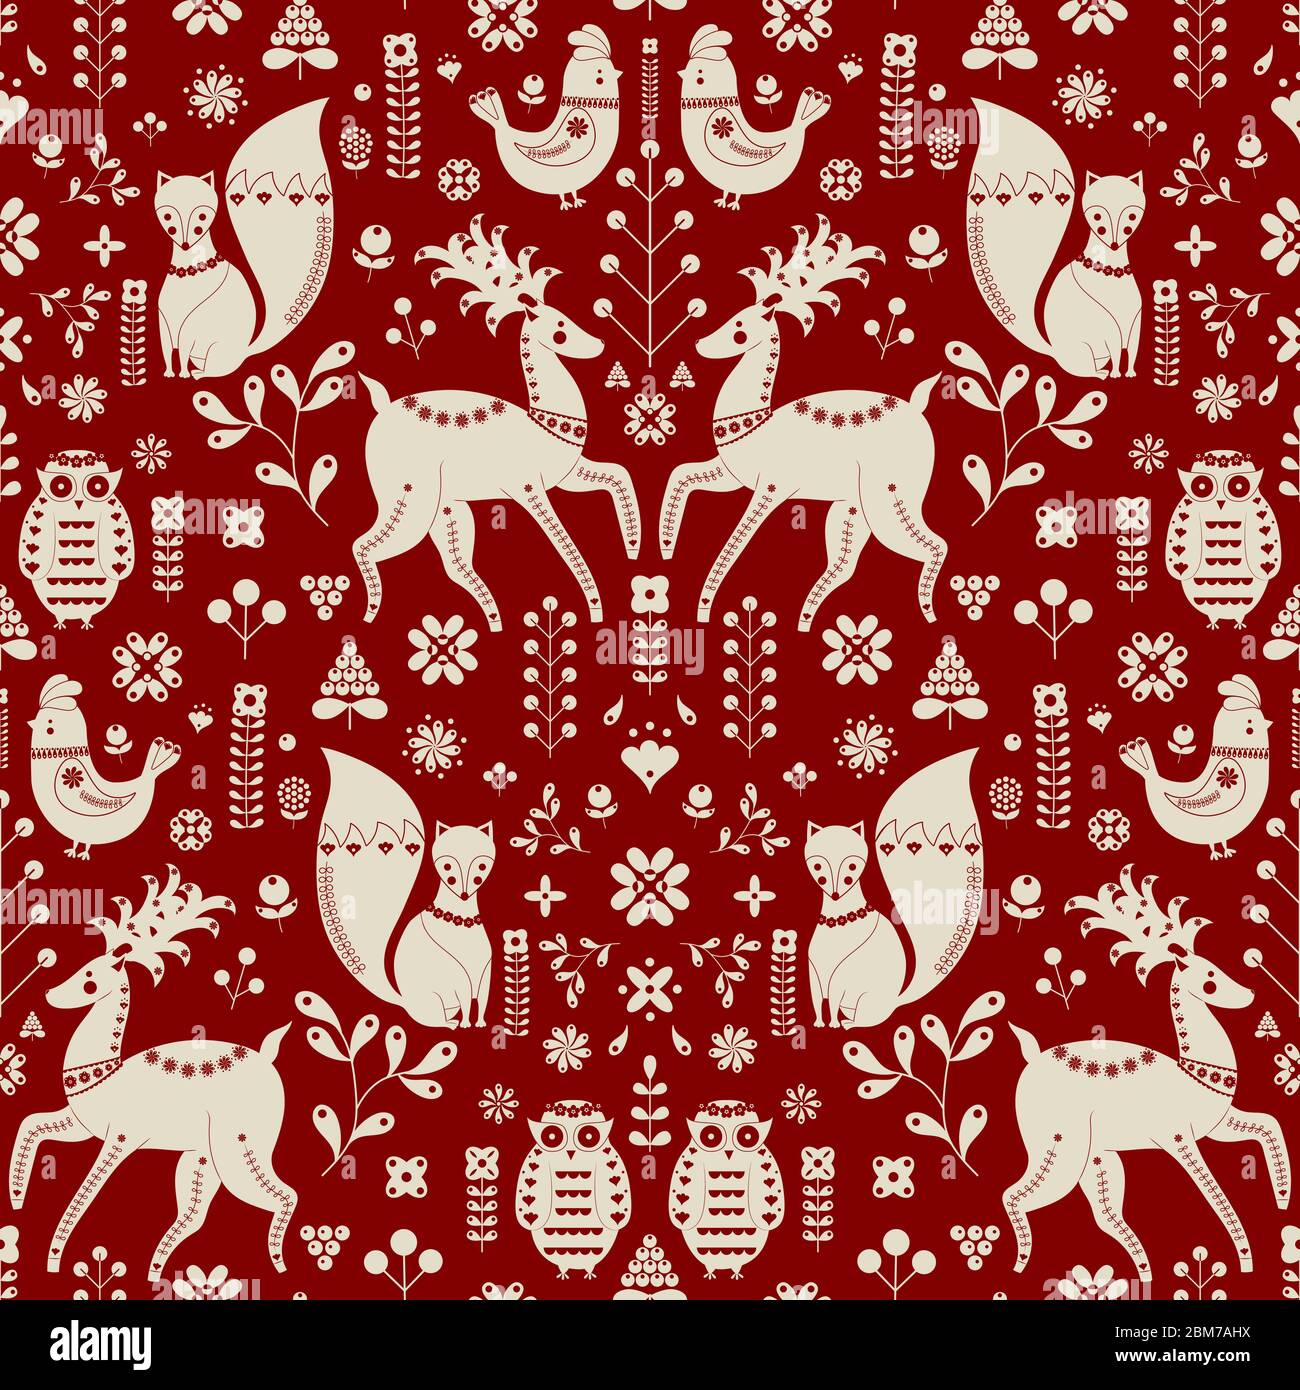 Christmas pattern with Scandinavian Folk inspired motifs on red background in a reflected scallop repeat. Scandinavian Folk Christmas Stock Vector